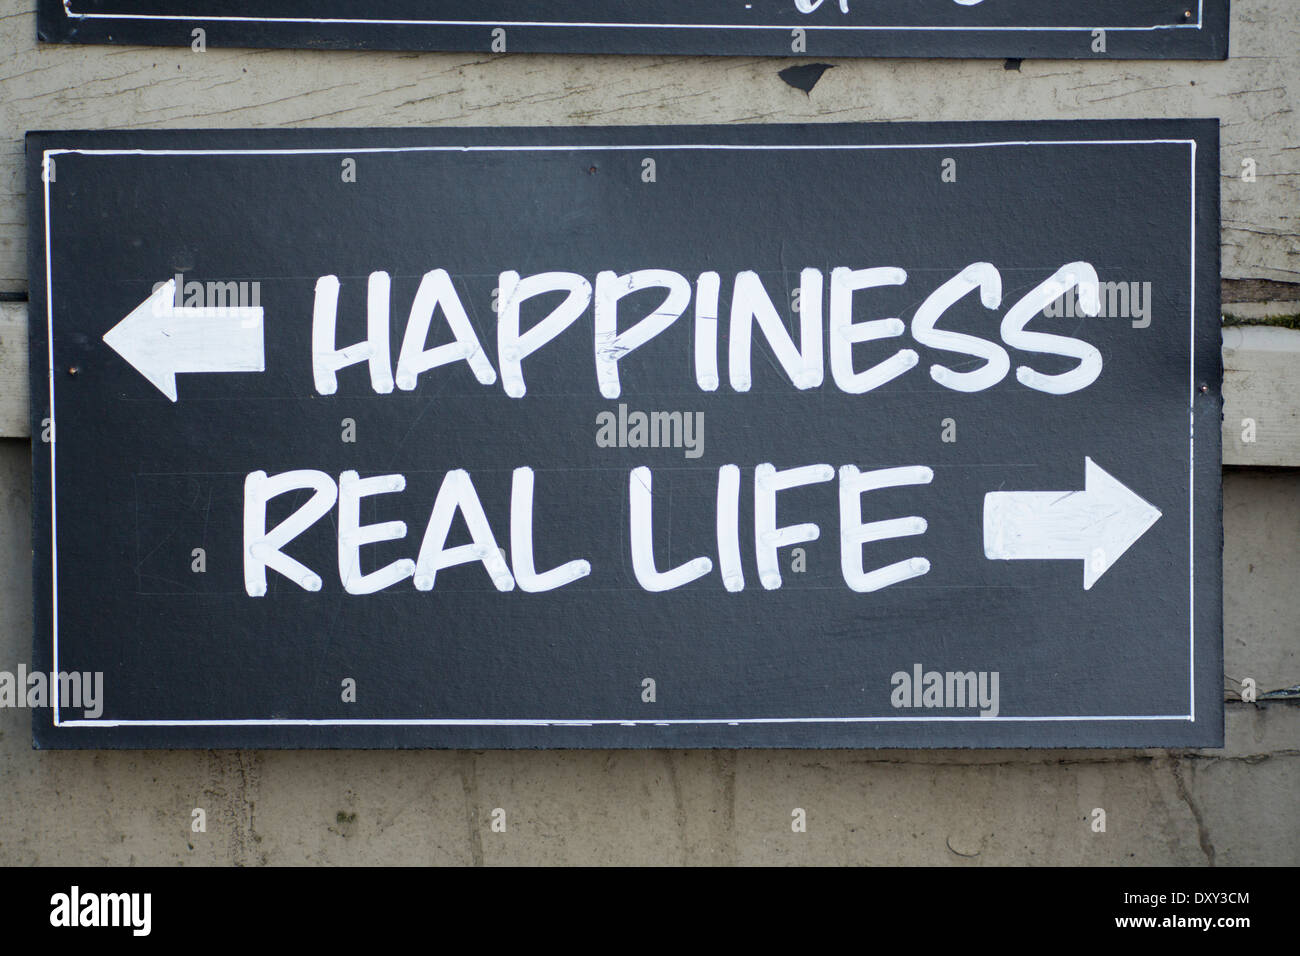 Blackboard sign with Happiness with arrow pointing in one direction and 'Real Life' with arrow pointing the other Escapism Stock Photo